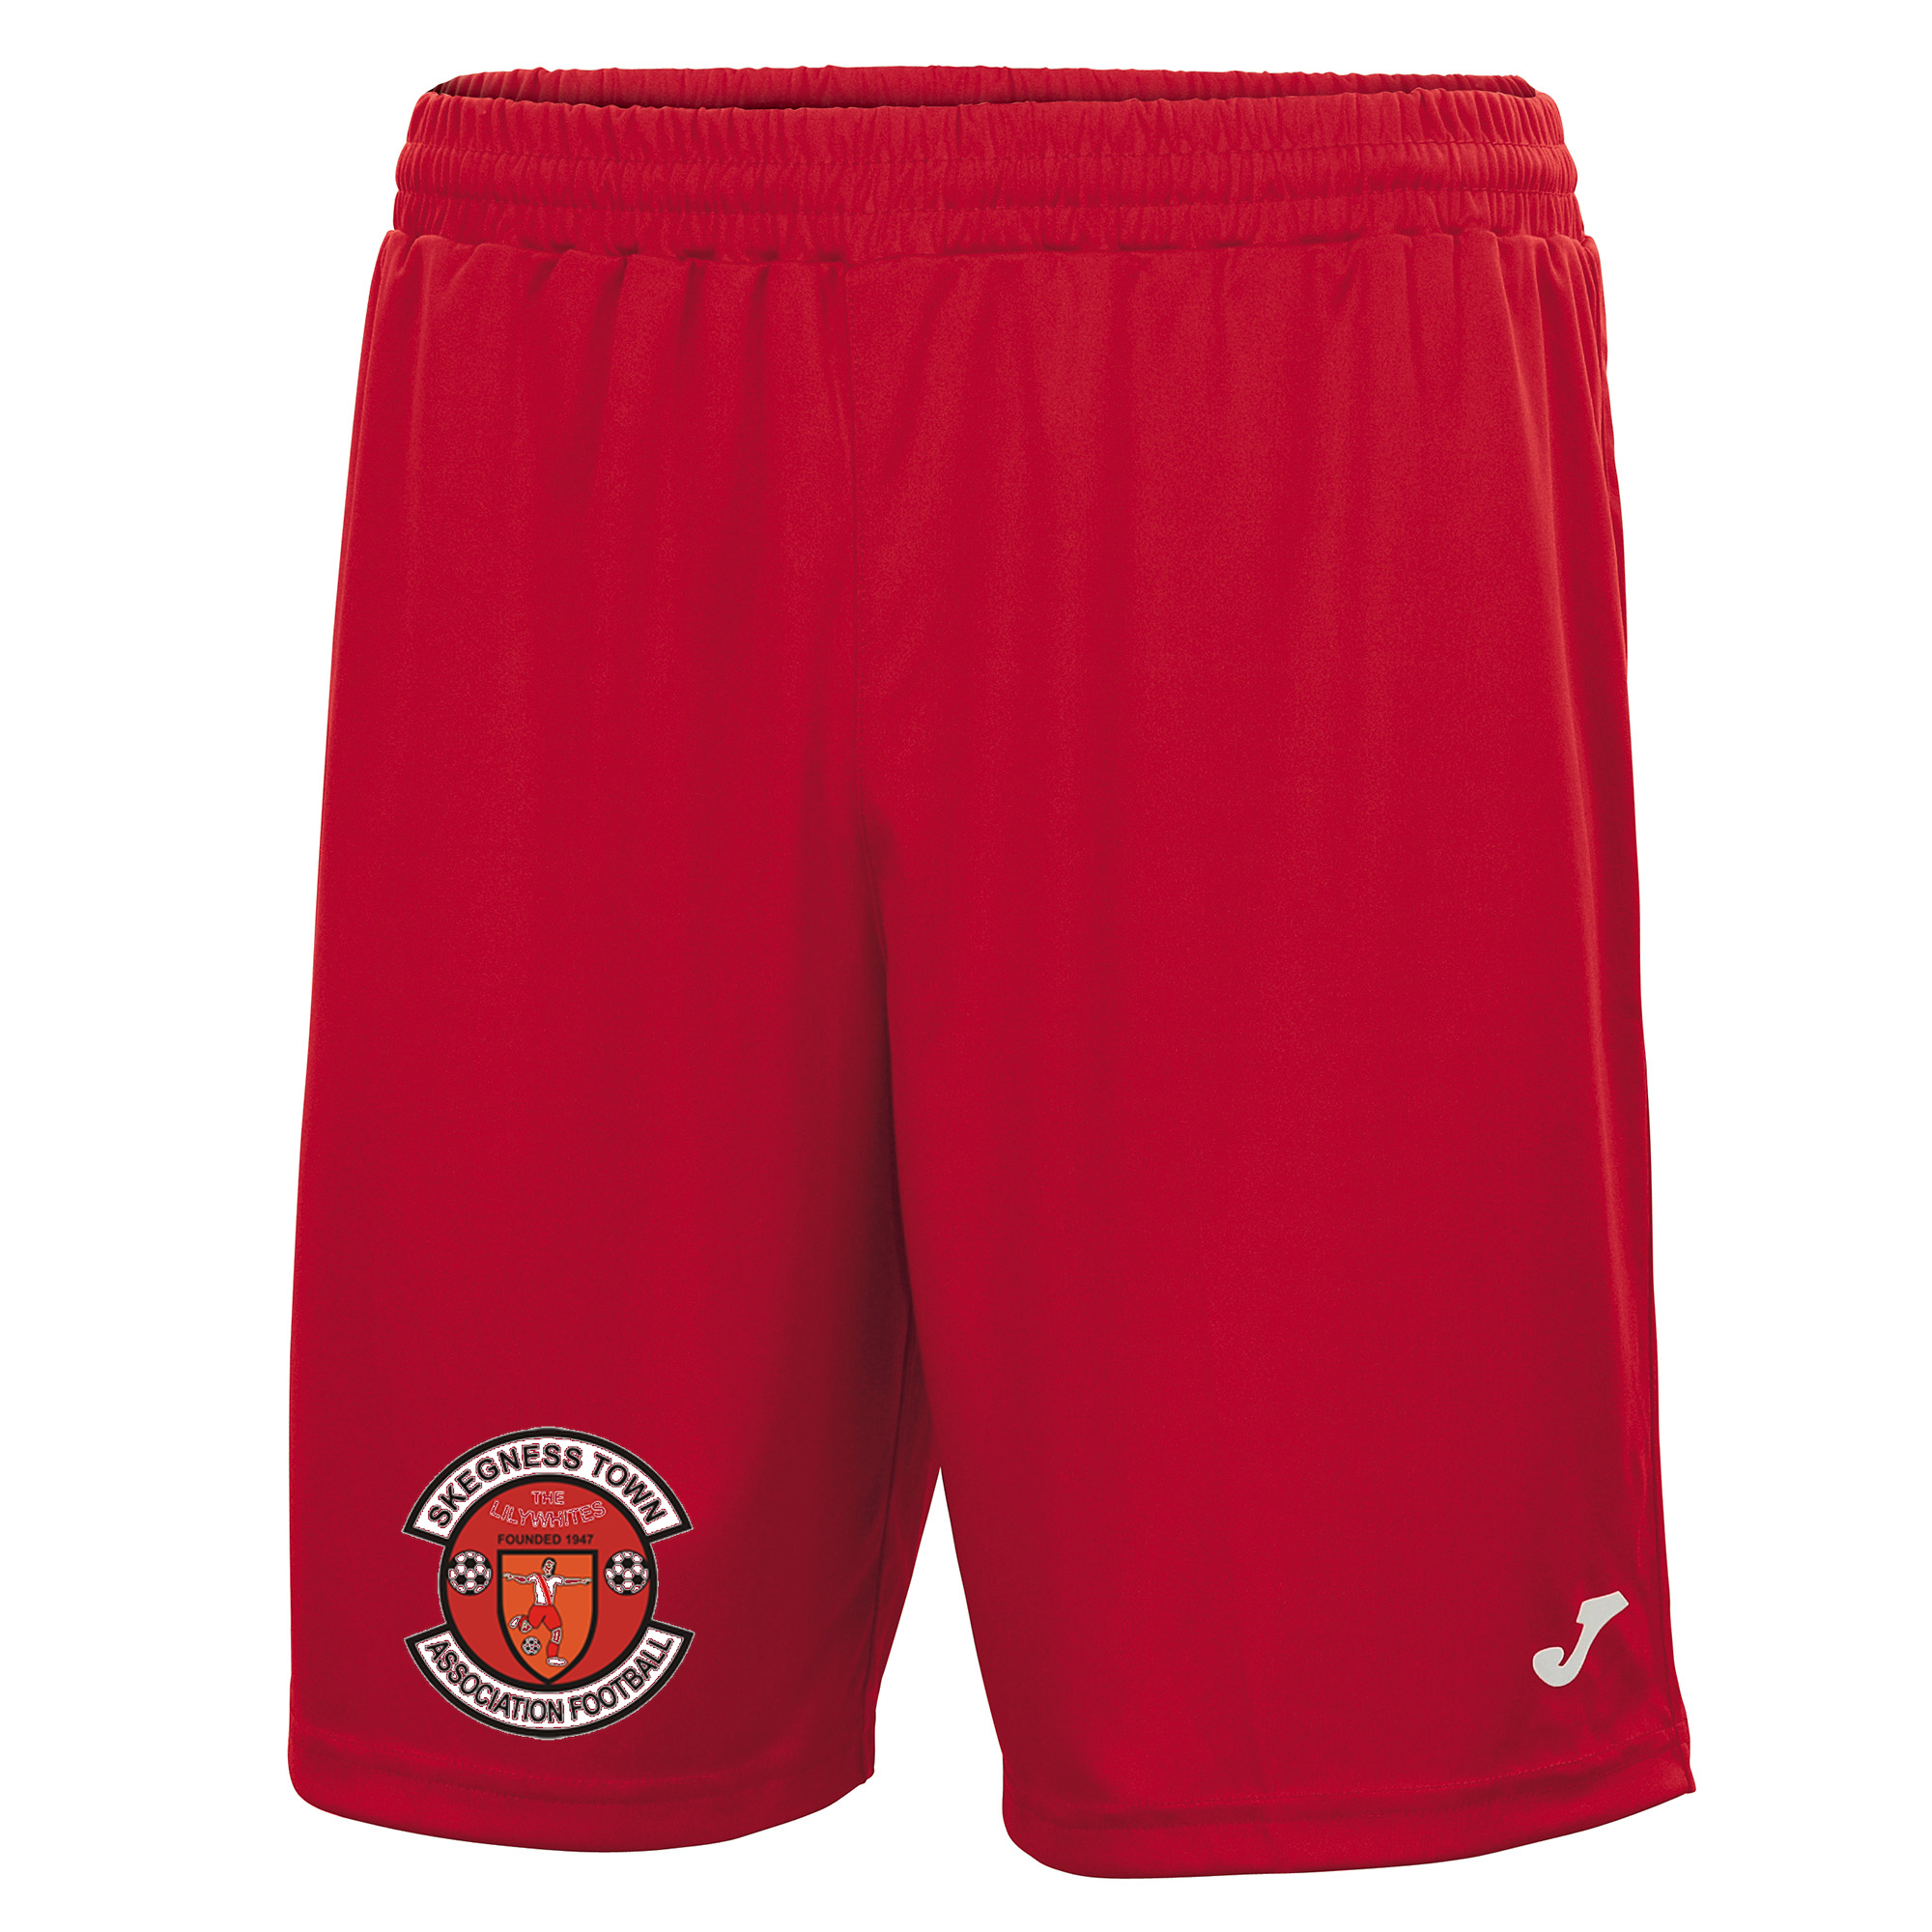 Skegness Town Home Shorts